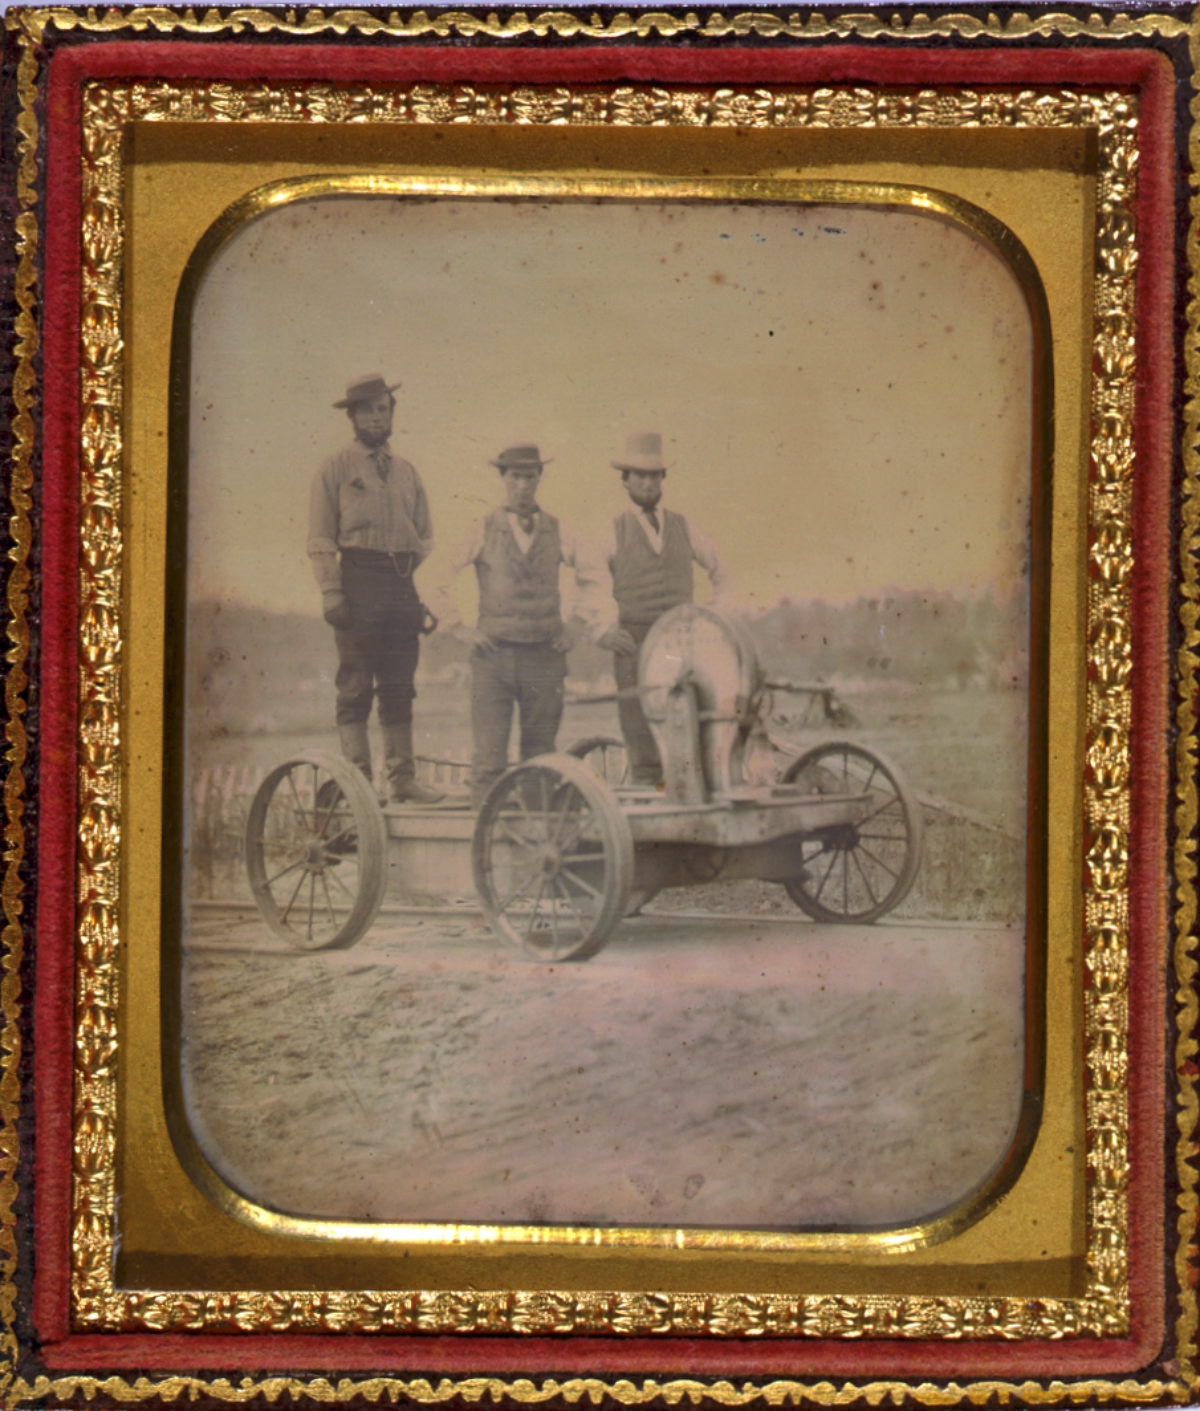 rail workers on hand pump car